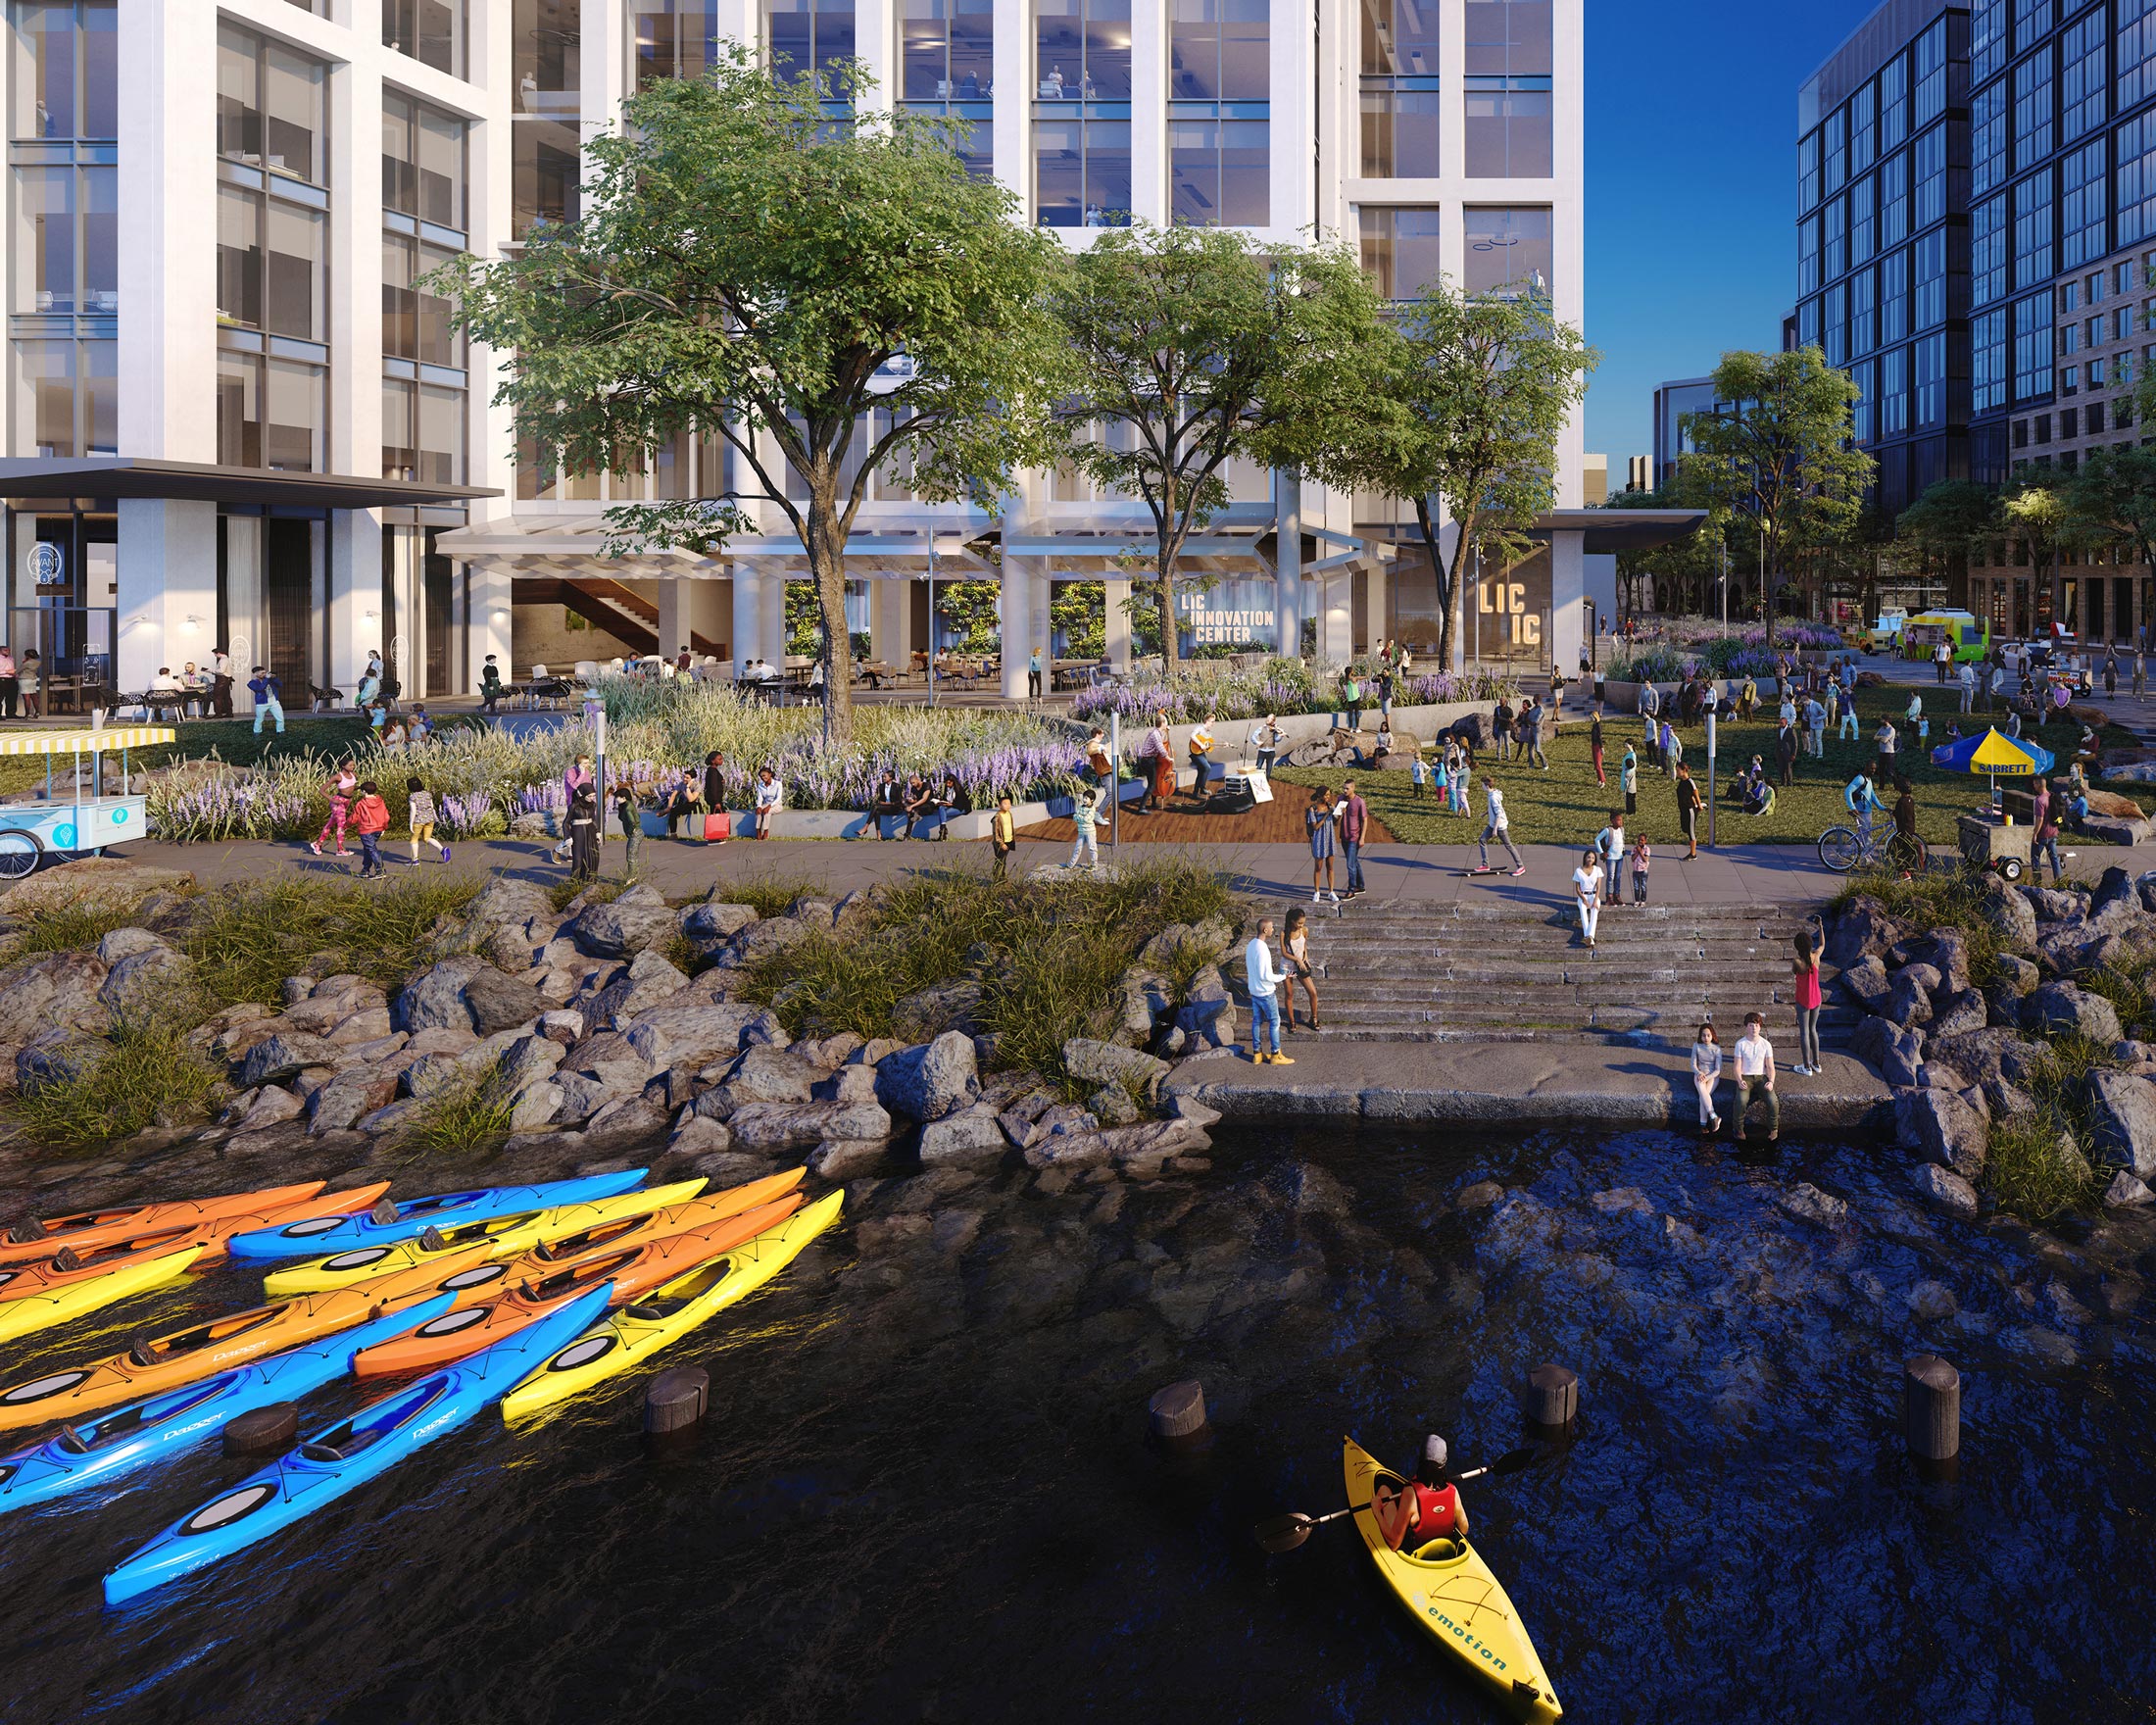 Architectural Rendering of the exterior of the Anable Basin project located in Long Island City in Queens, New York